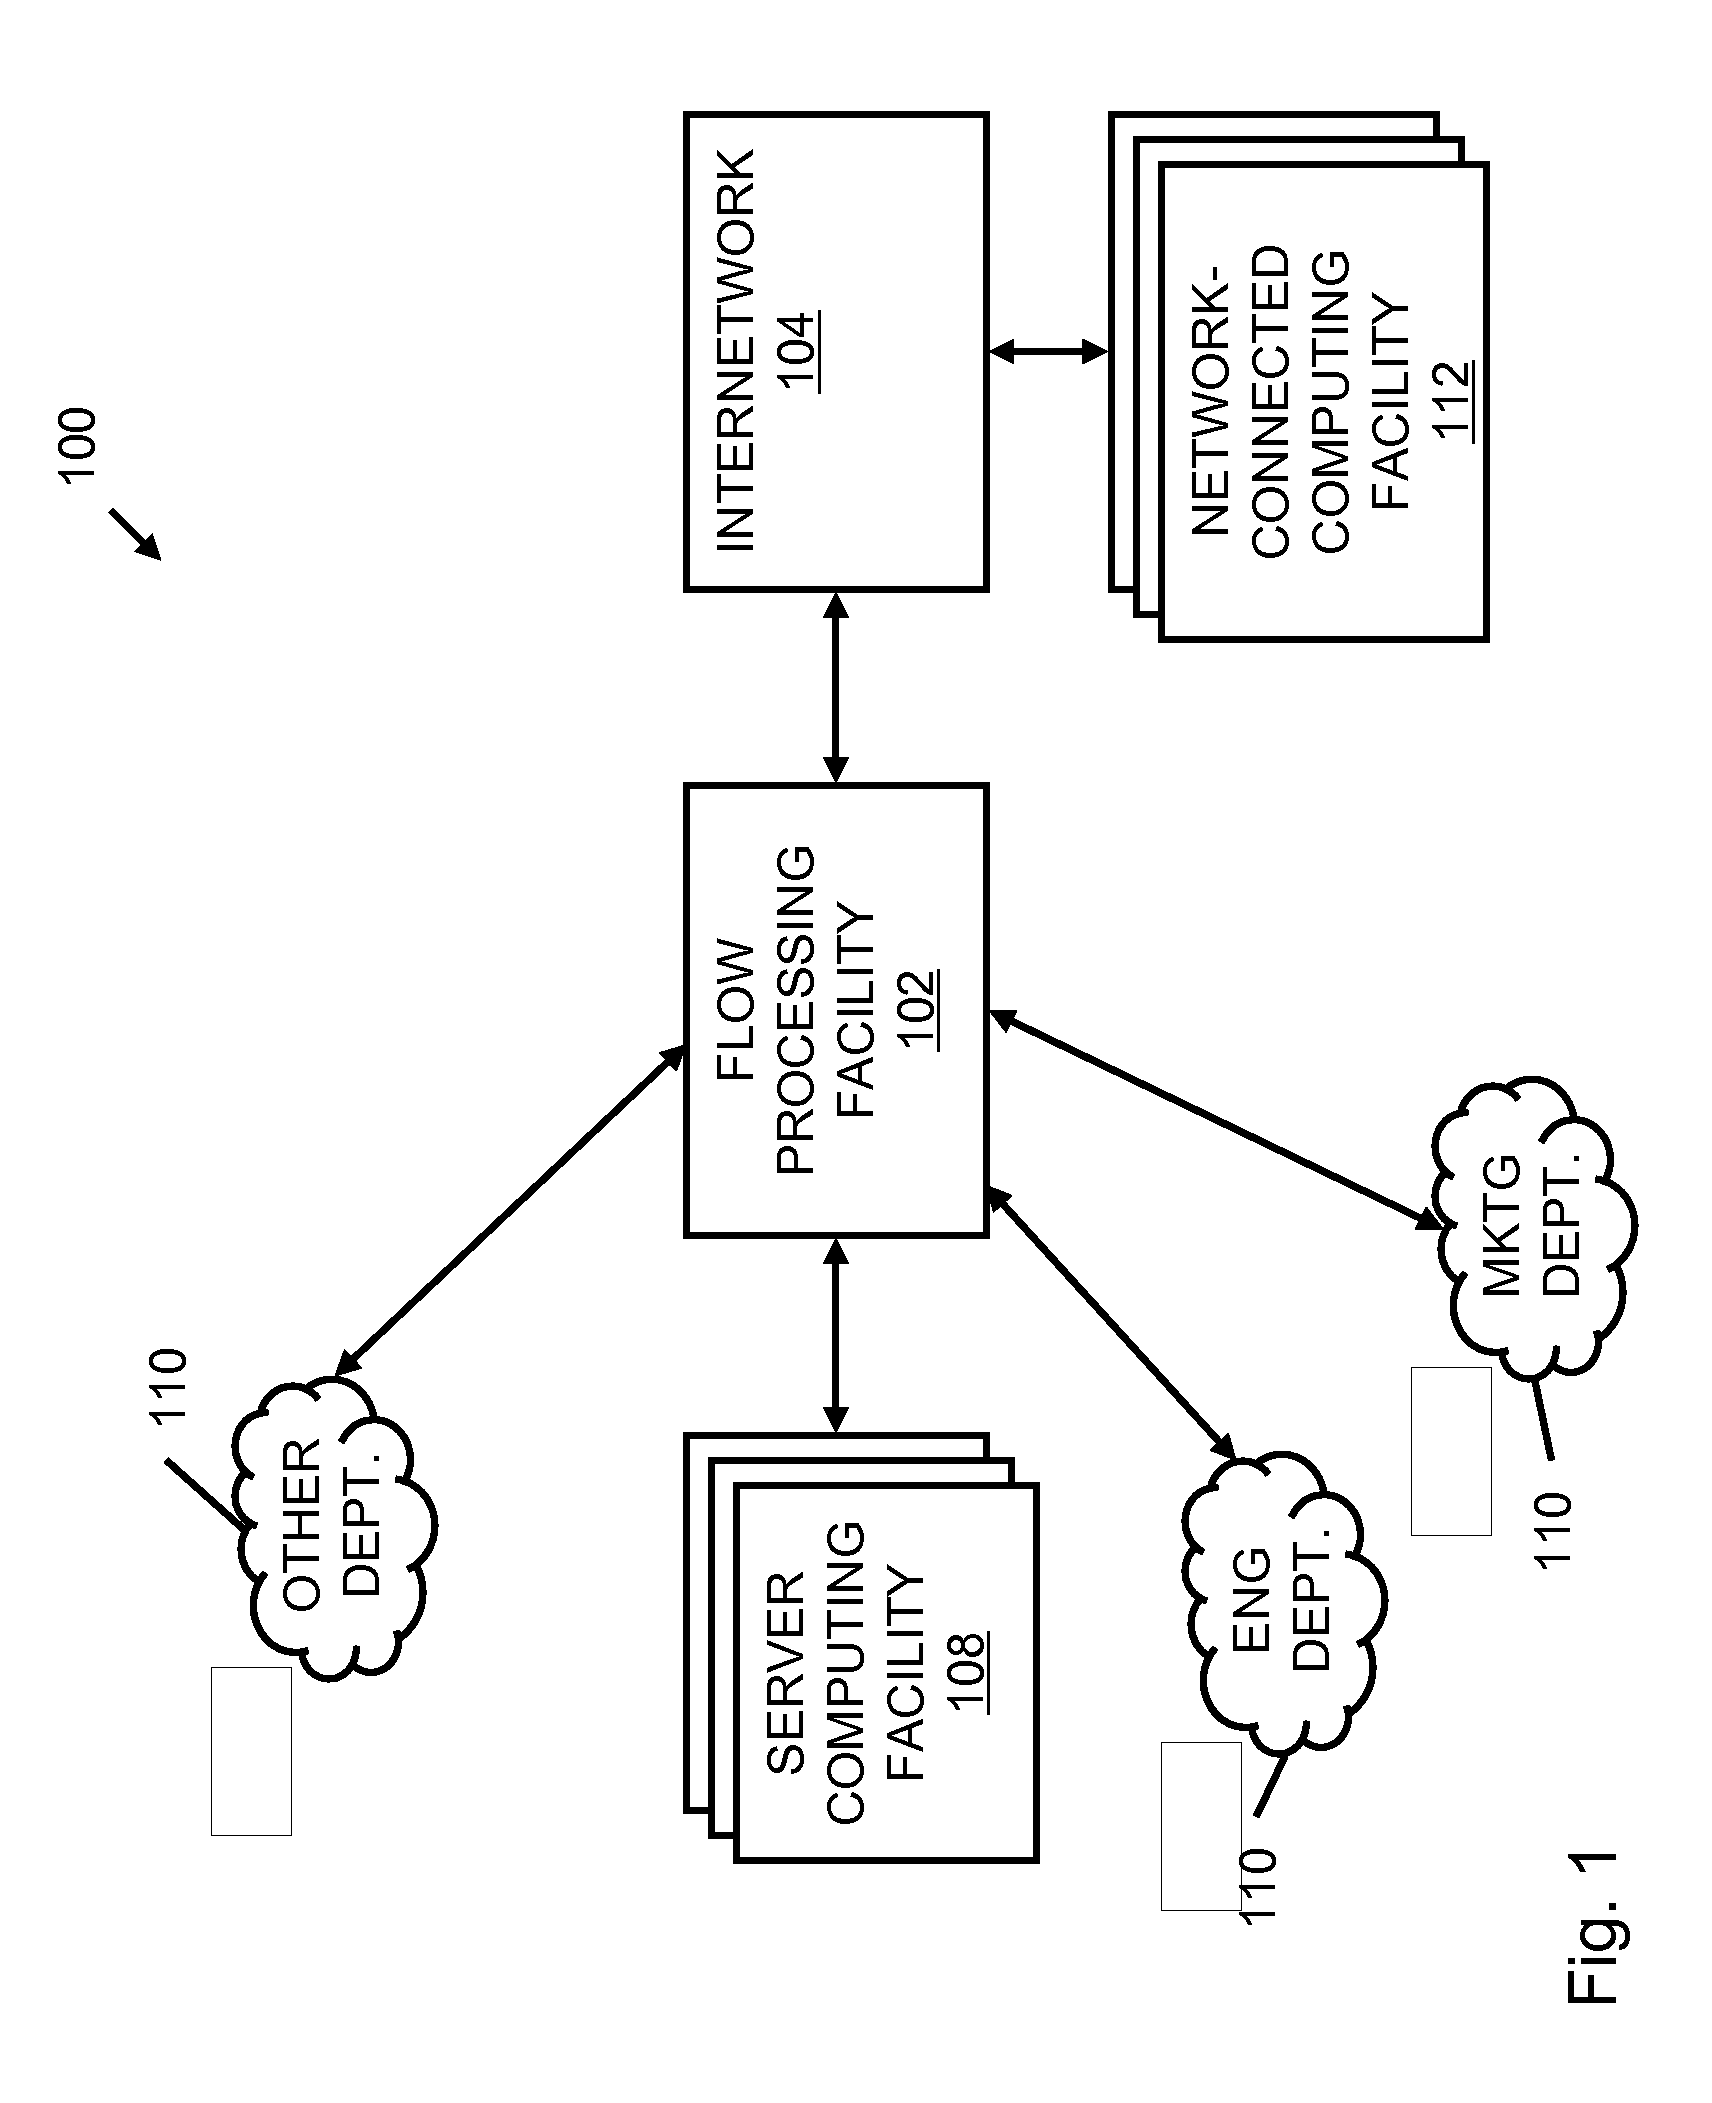 Systems and methods for processing data flows